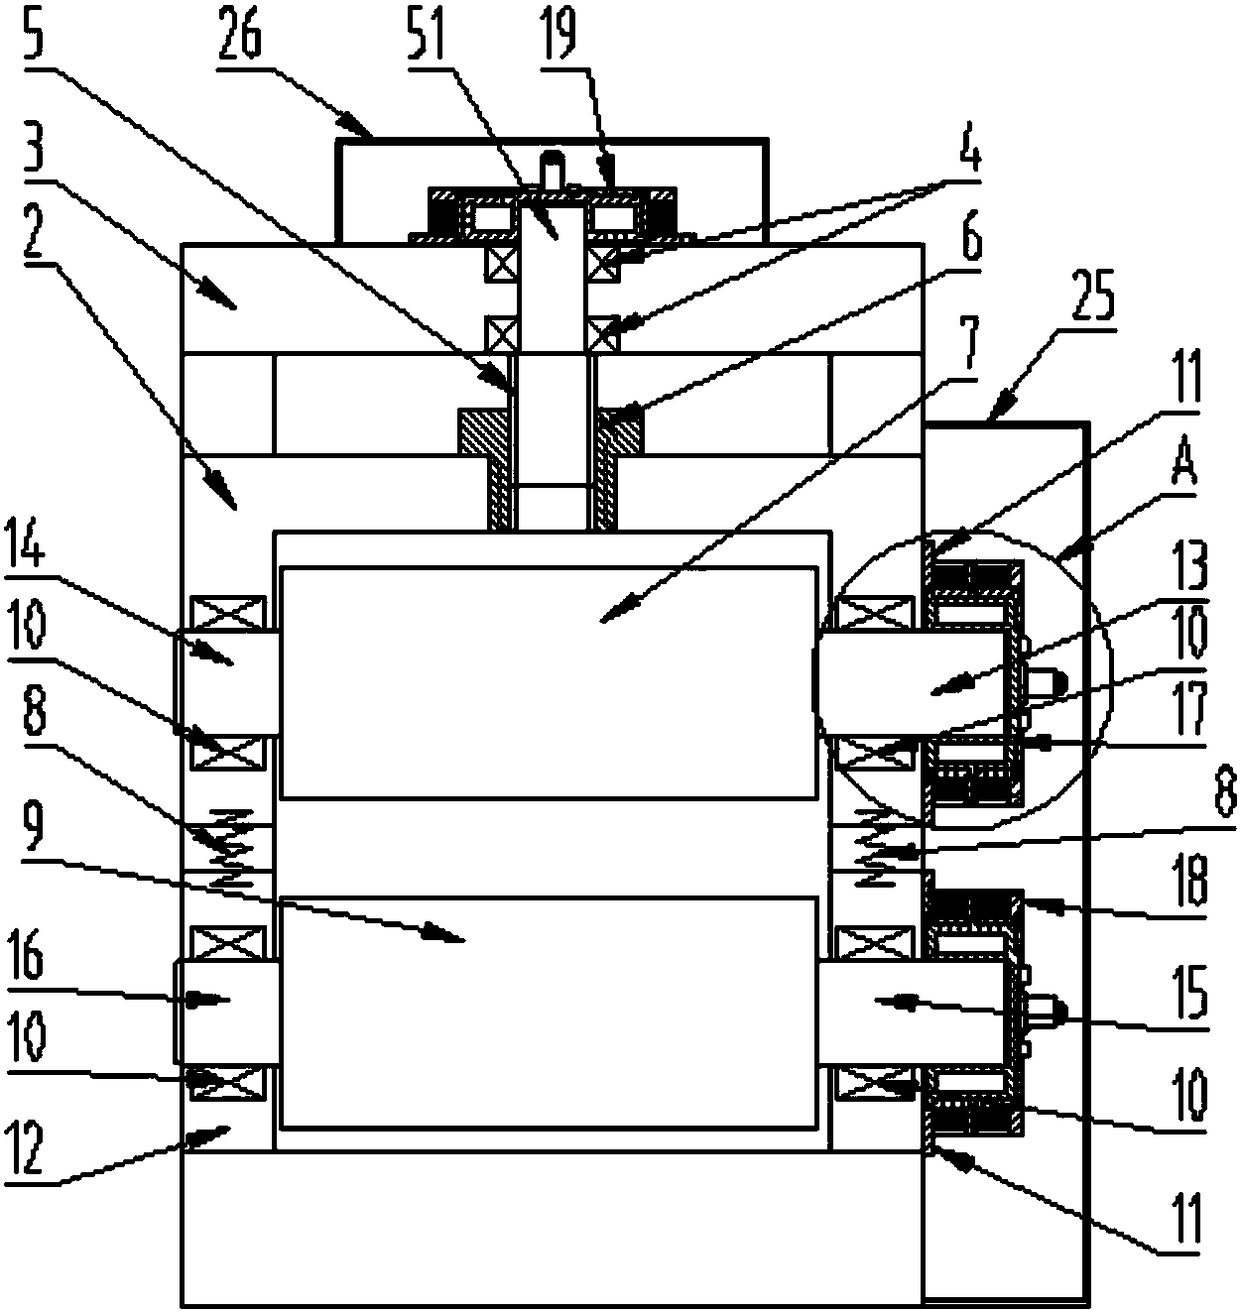 Forge rolling machine directly driven by frameless permanent magnet synchronous motors